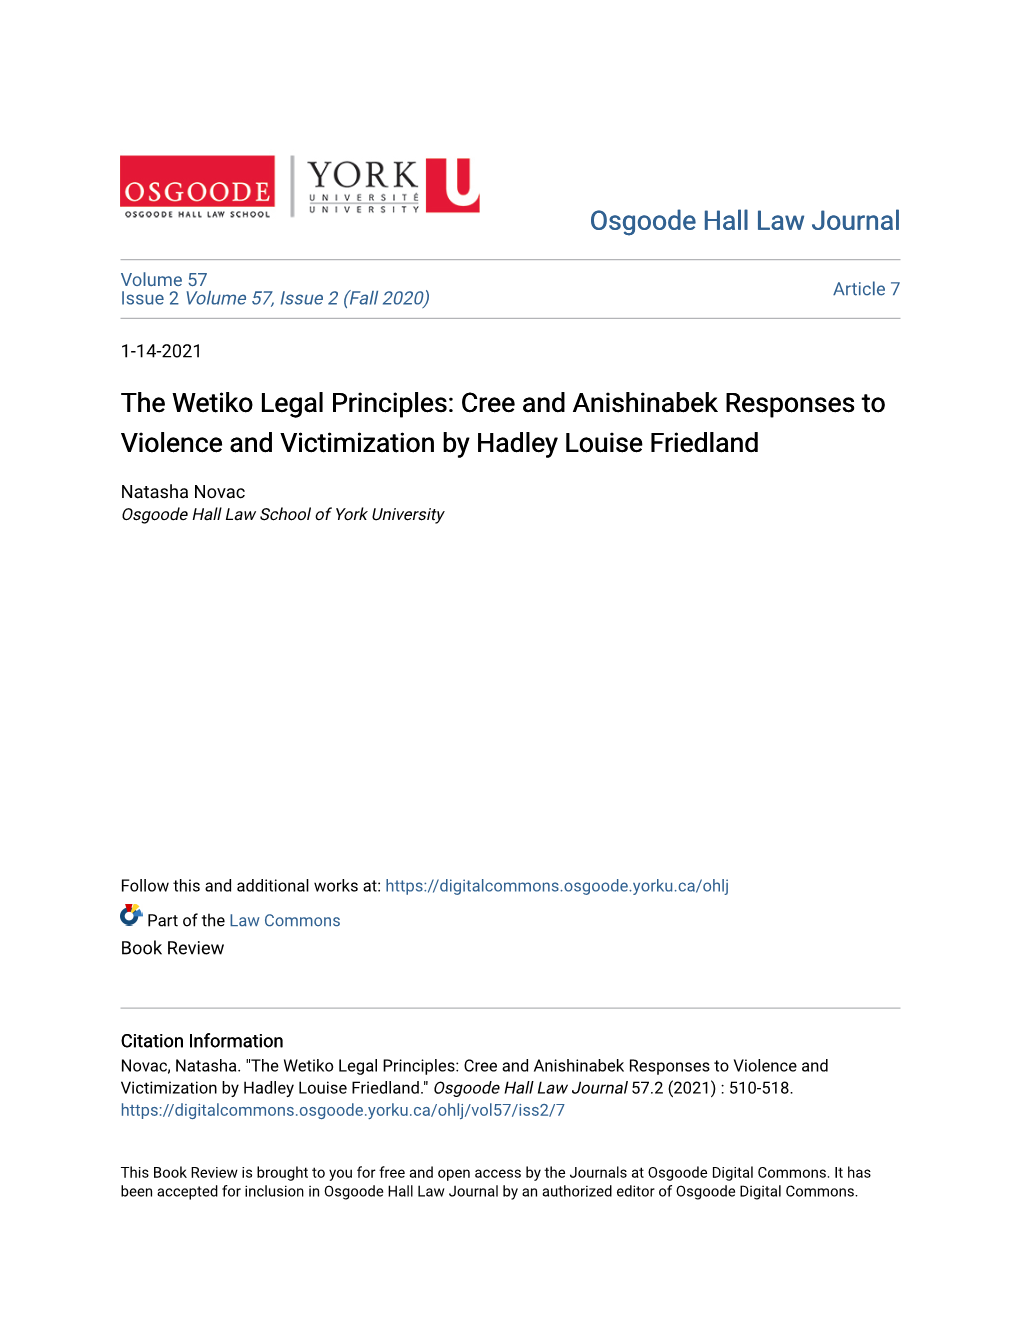 The Wetiko Legal Principles: Cree and Anishinabek Responses to Violence and Victimization by Hadley Louise Friedland